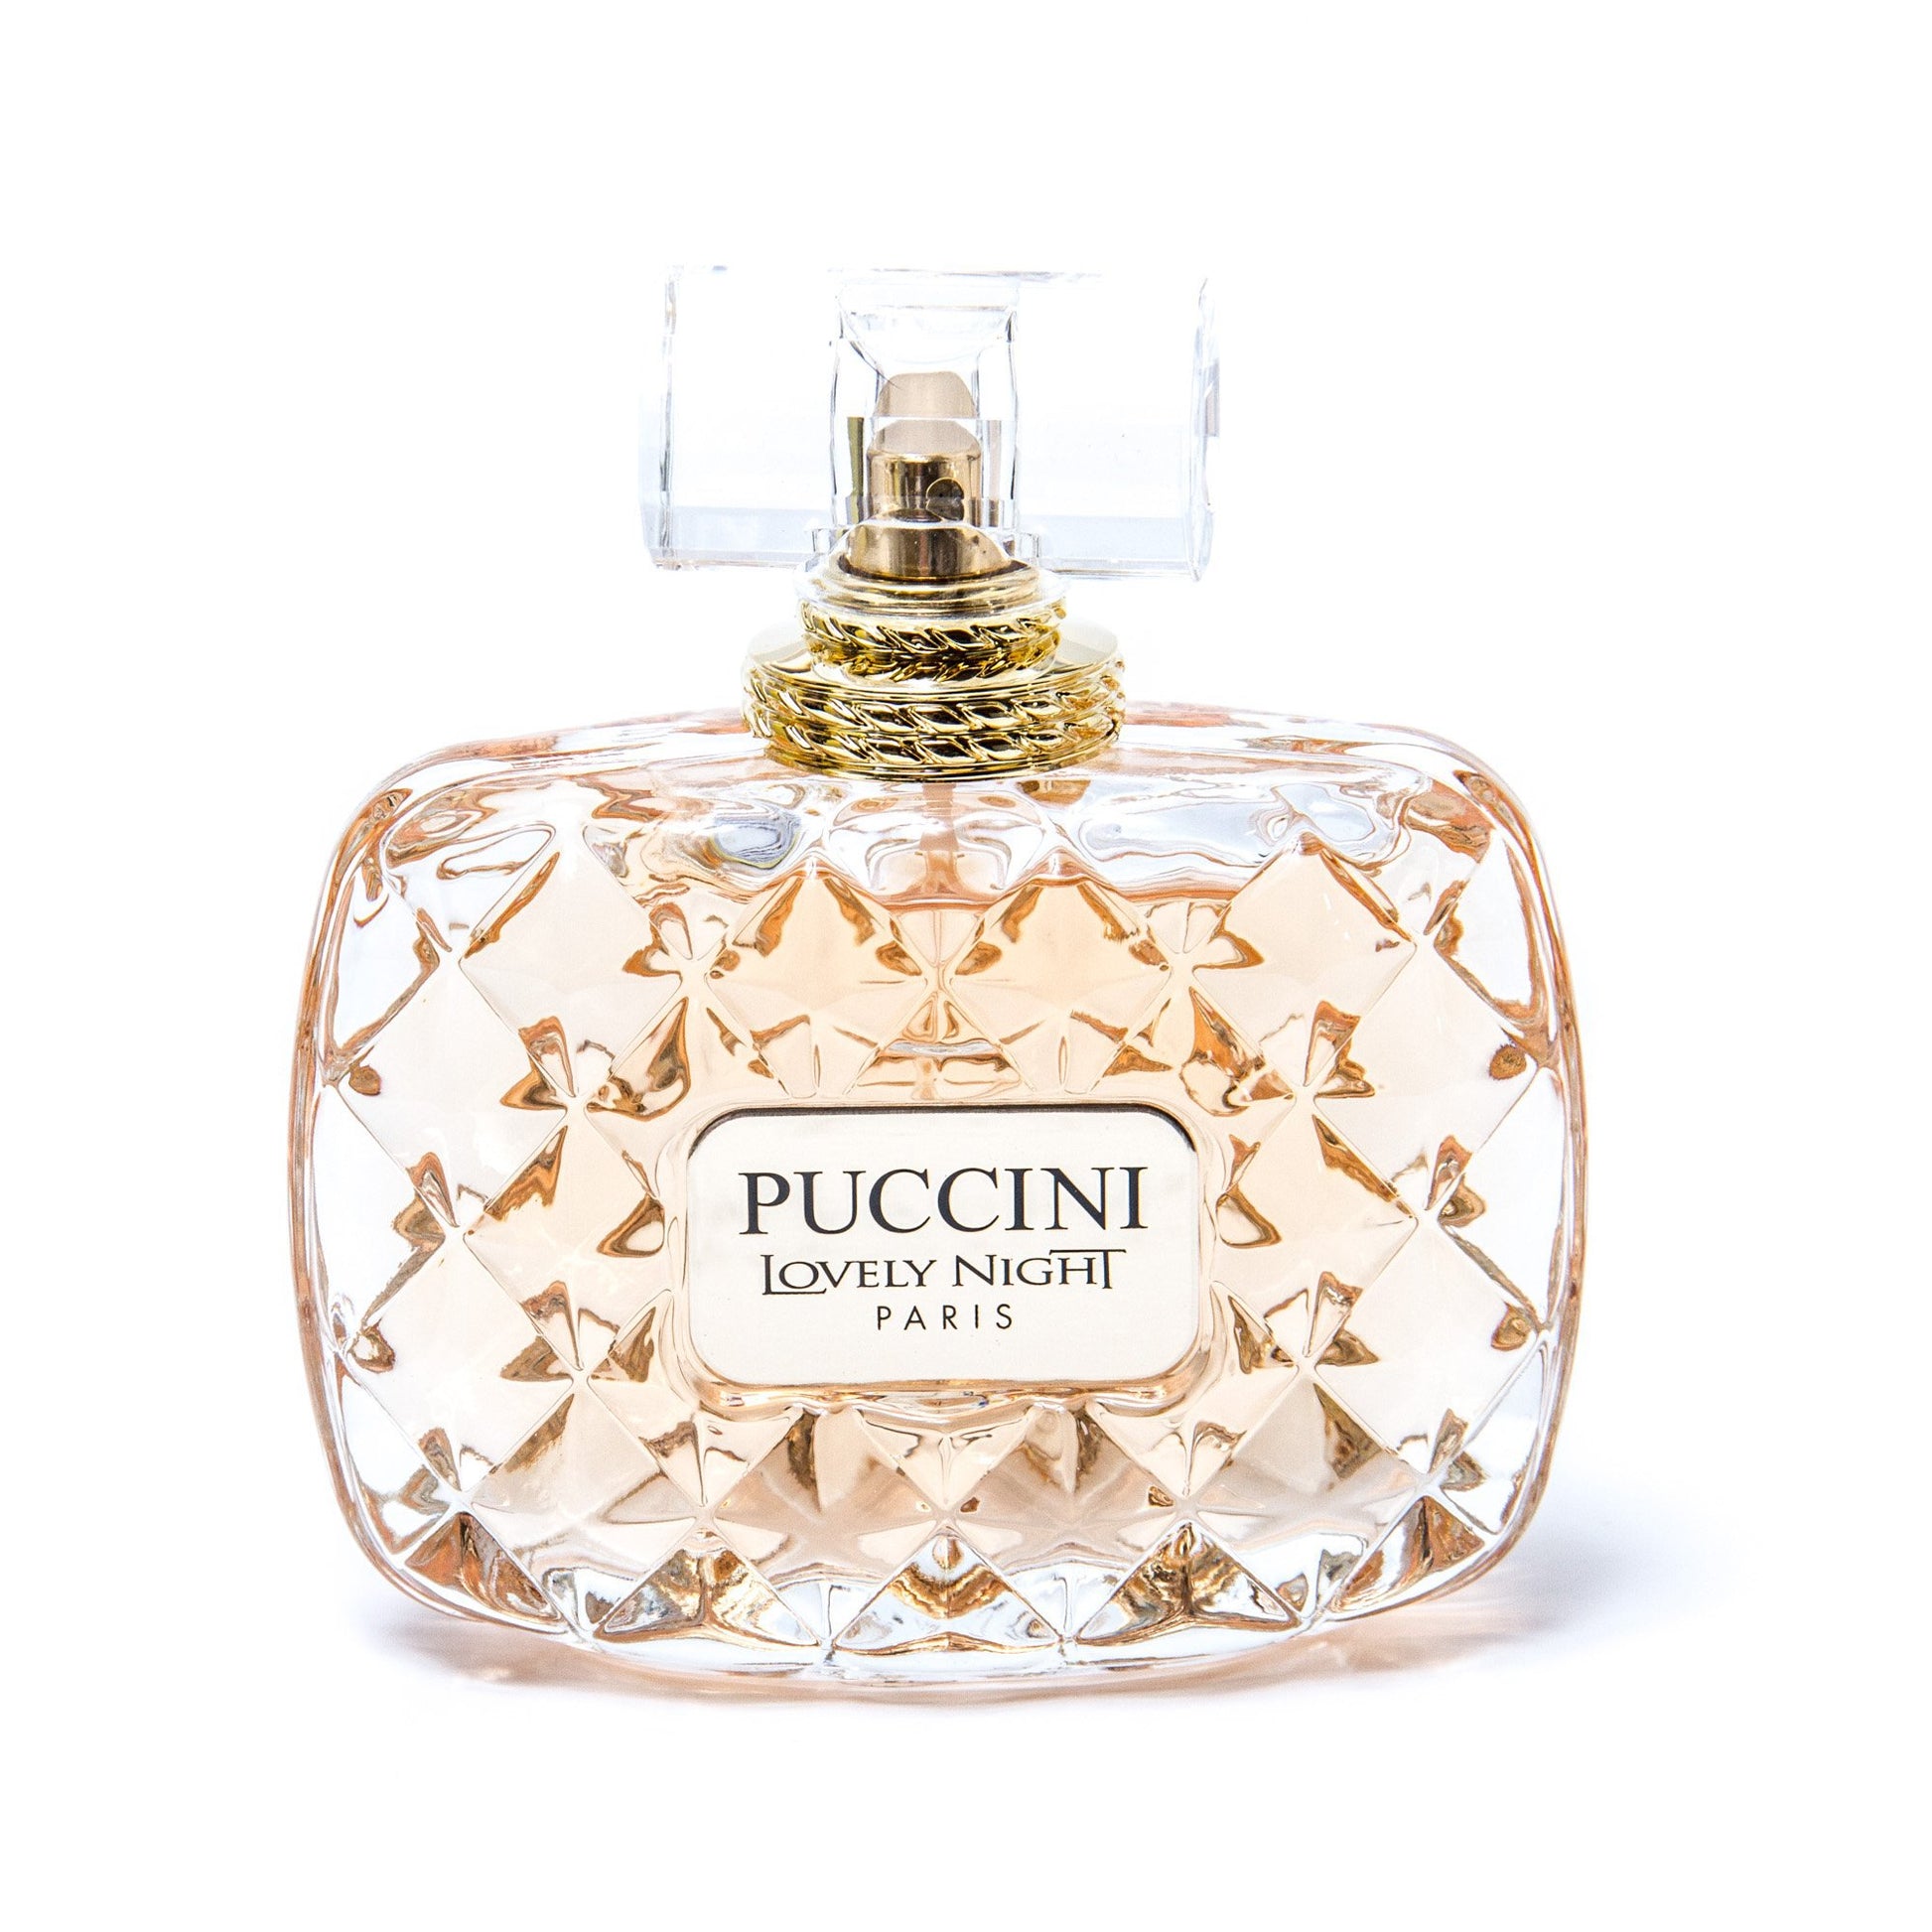 Puccini Lovely Night Eau de Toilette Spray for Women, Product image 2